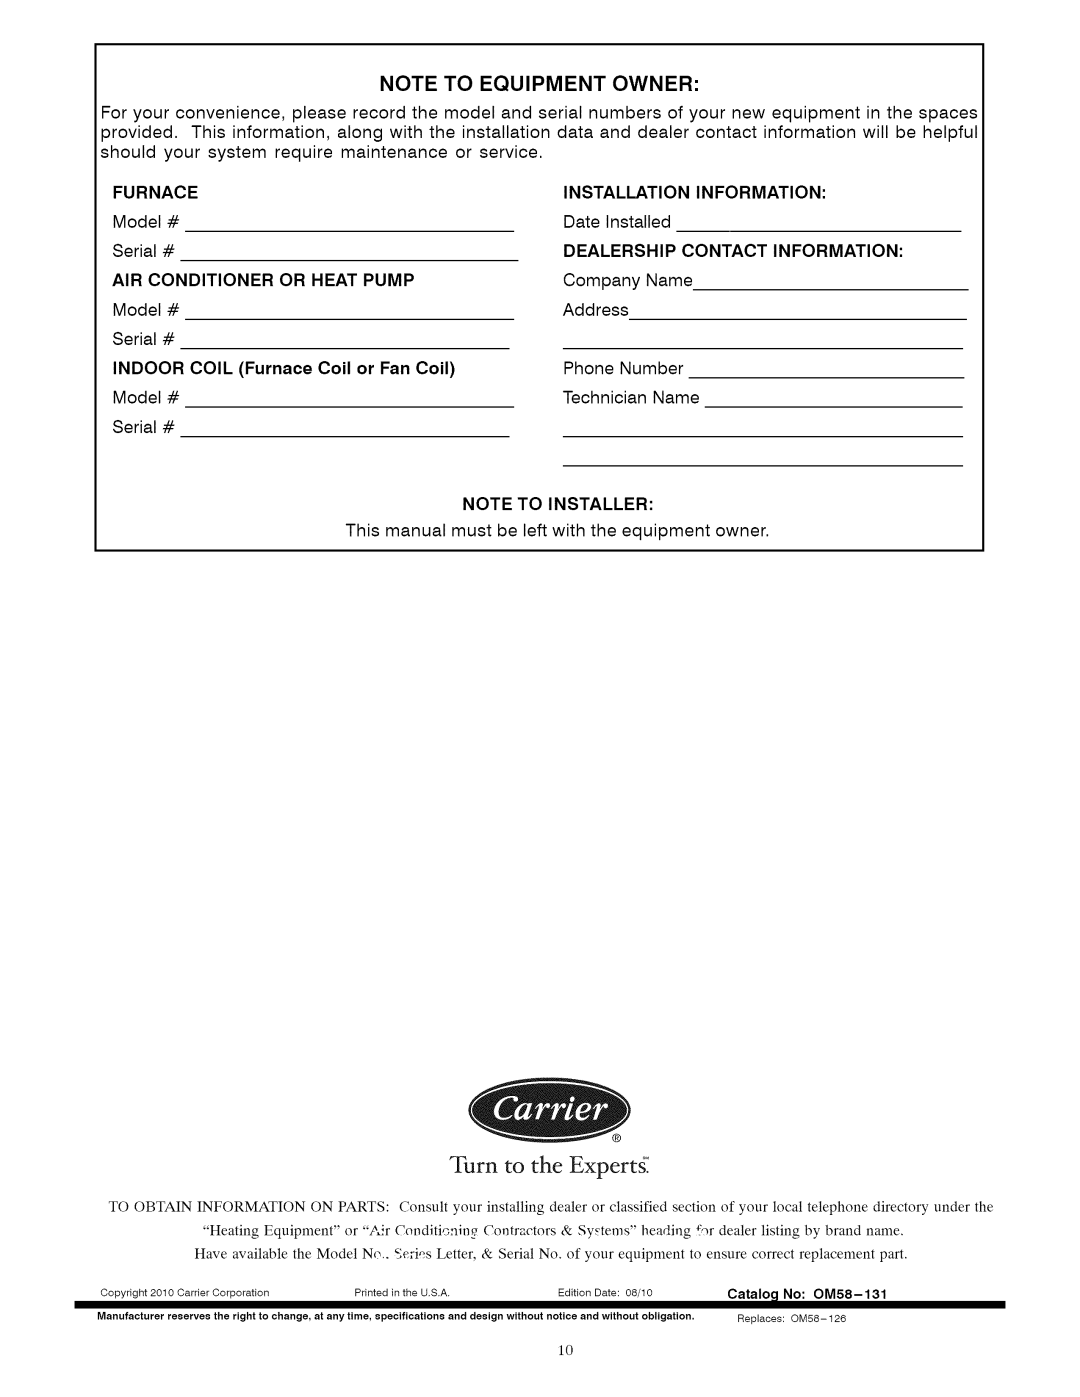 Carrier A10247 owner manual Turn to the Expertg, Note To Equipment Owner, Installation, Information, Dealership 